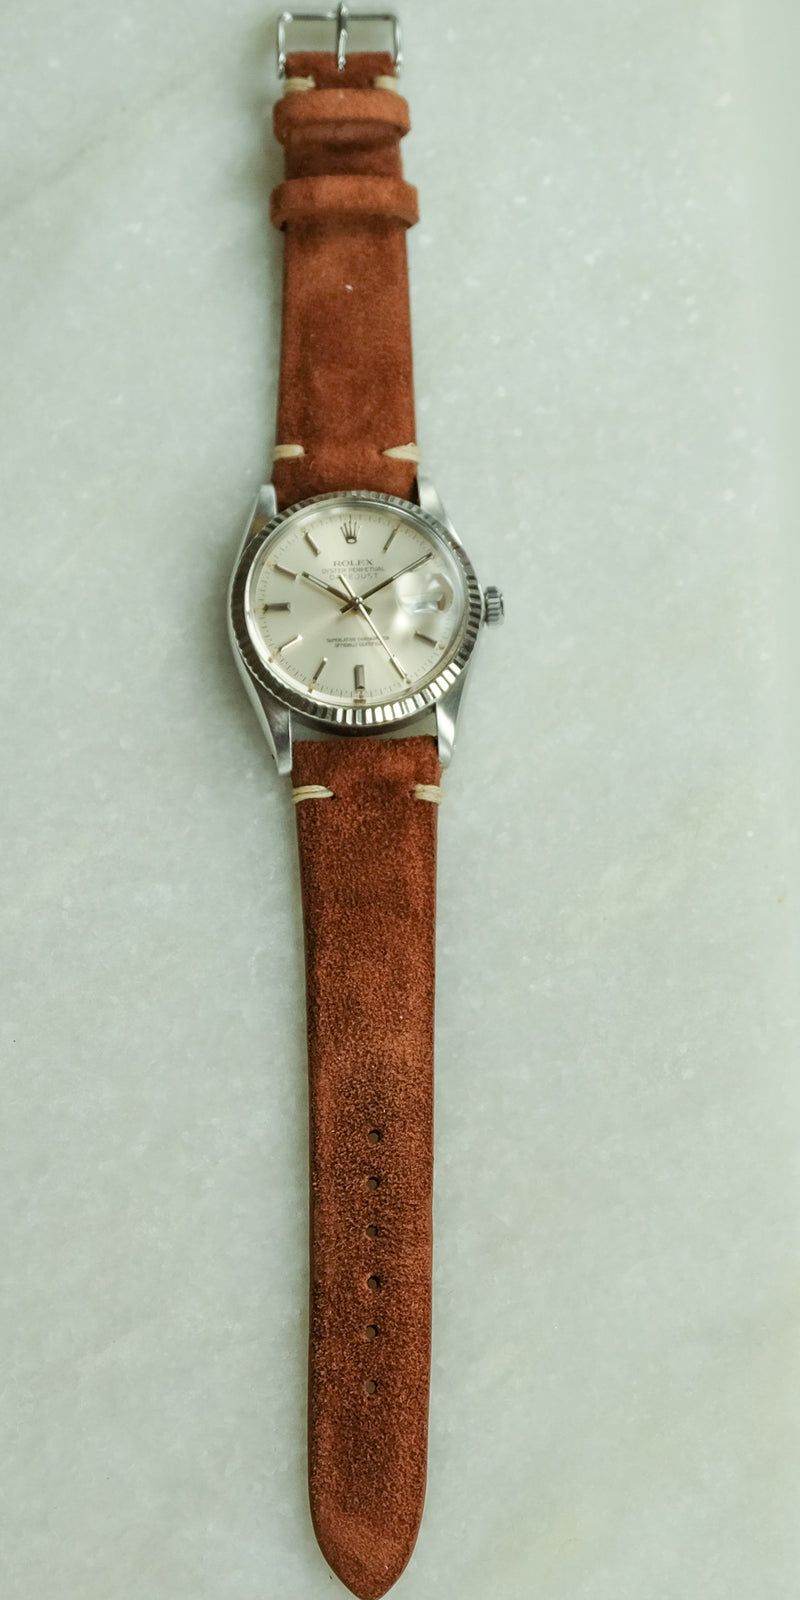 The Lord - Cognac Suede Watch Strap